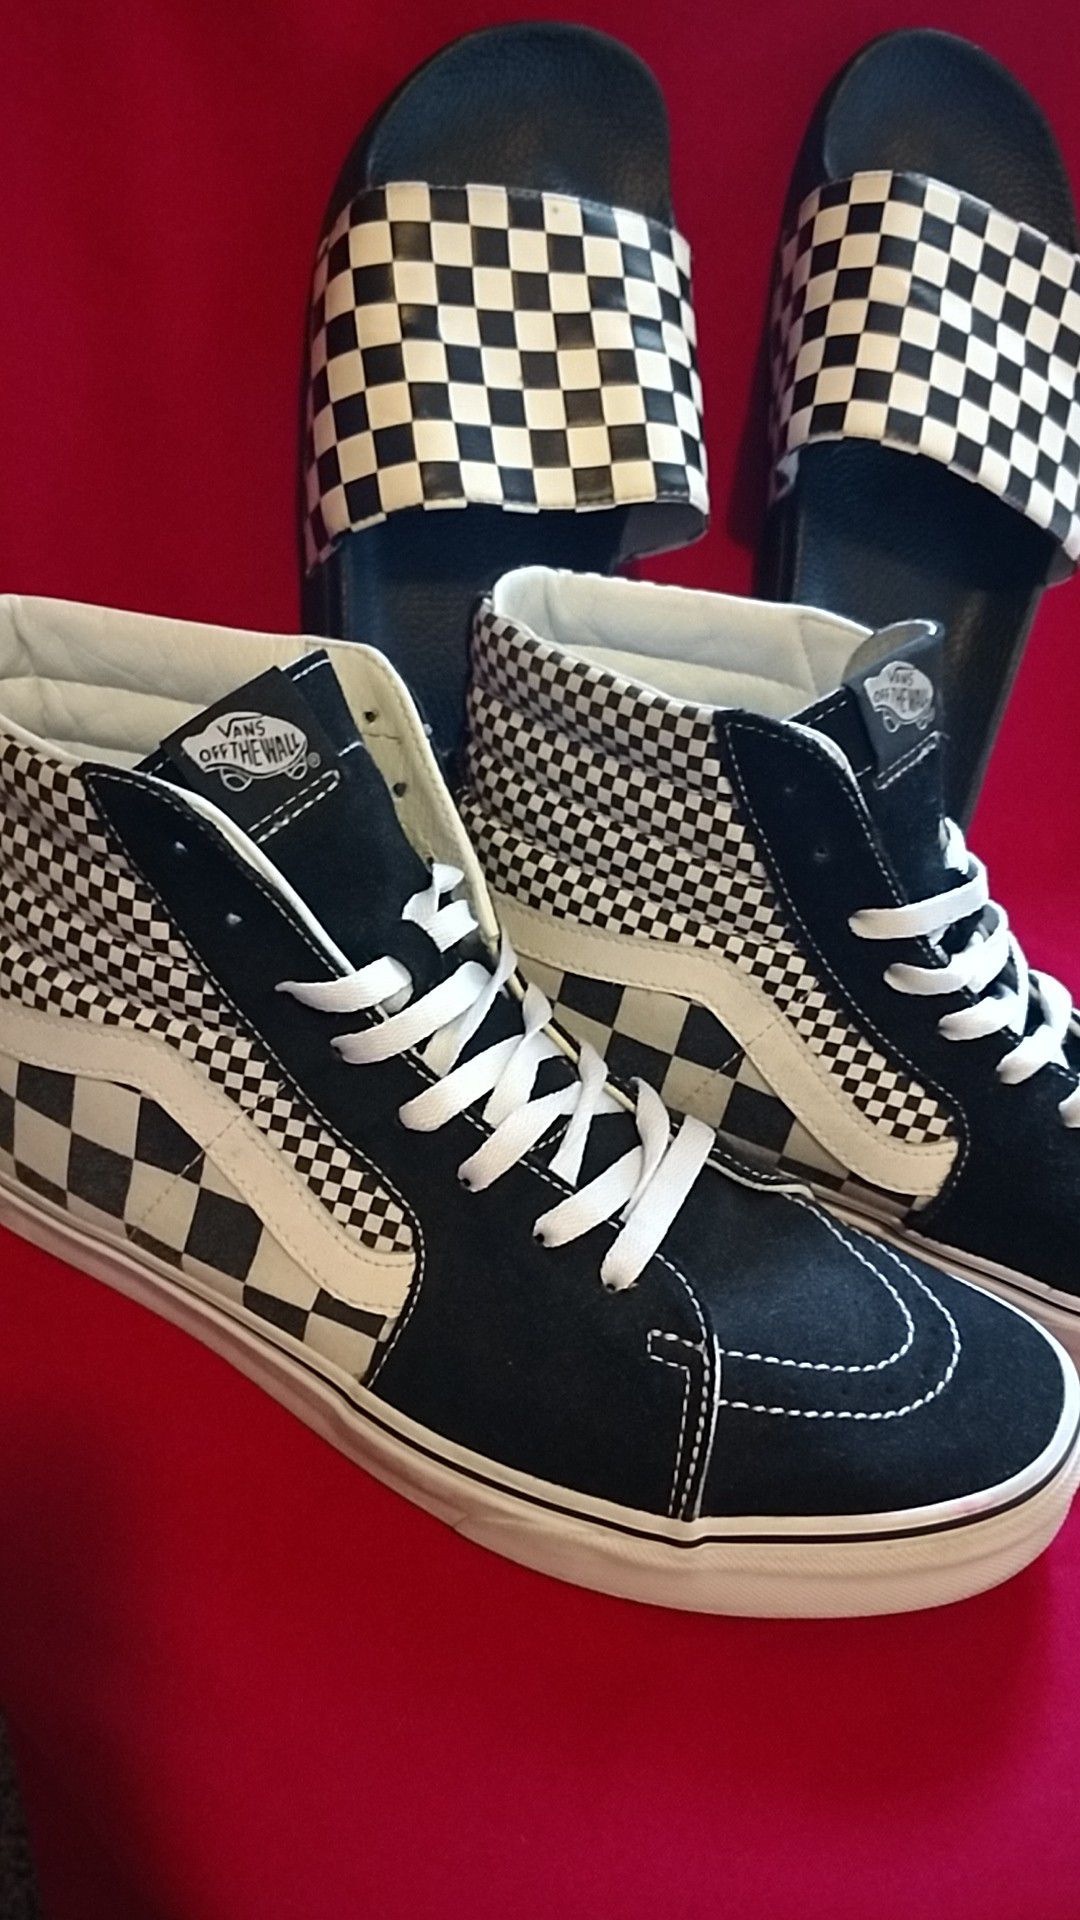 Vans Bundle, Size 13. High tops and slides. Old-School checkered.